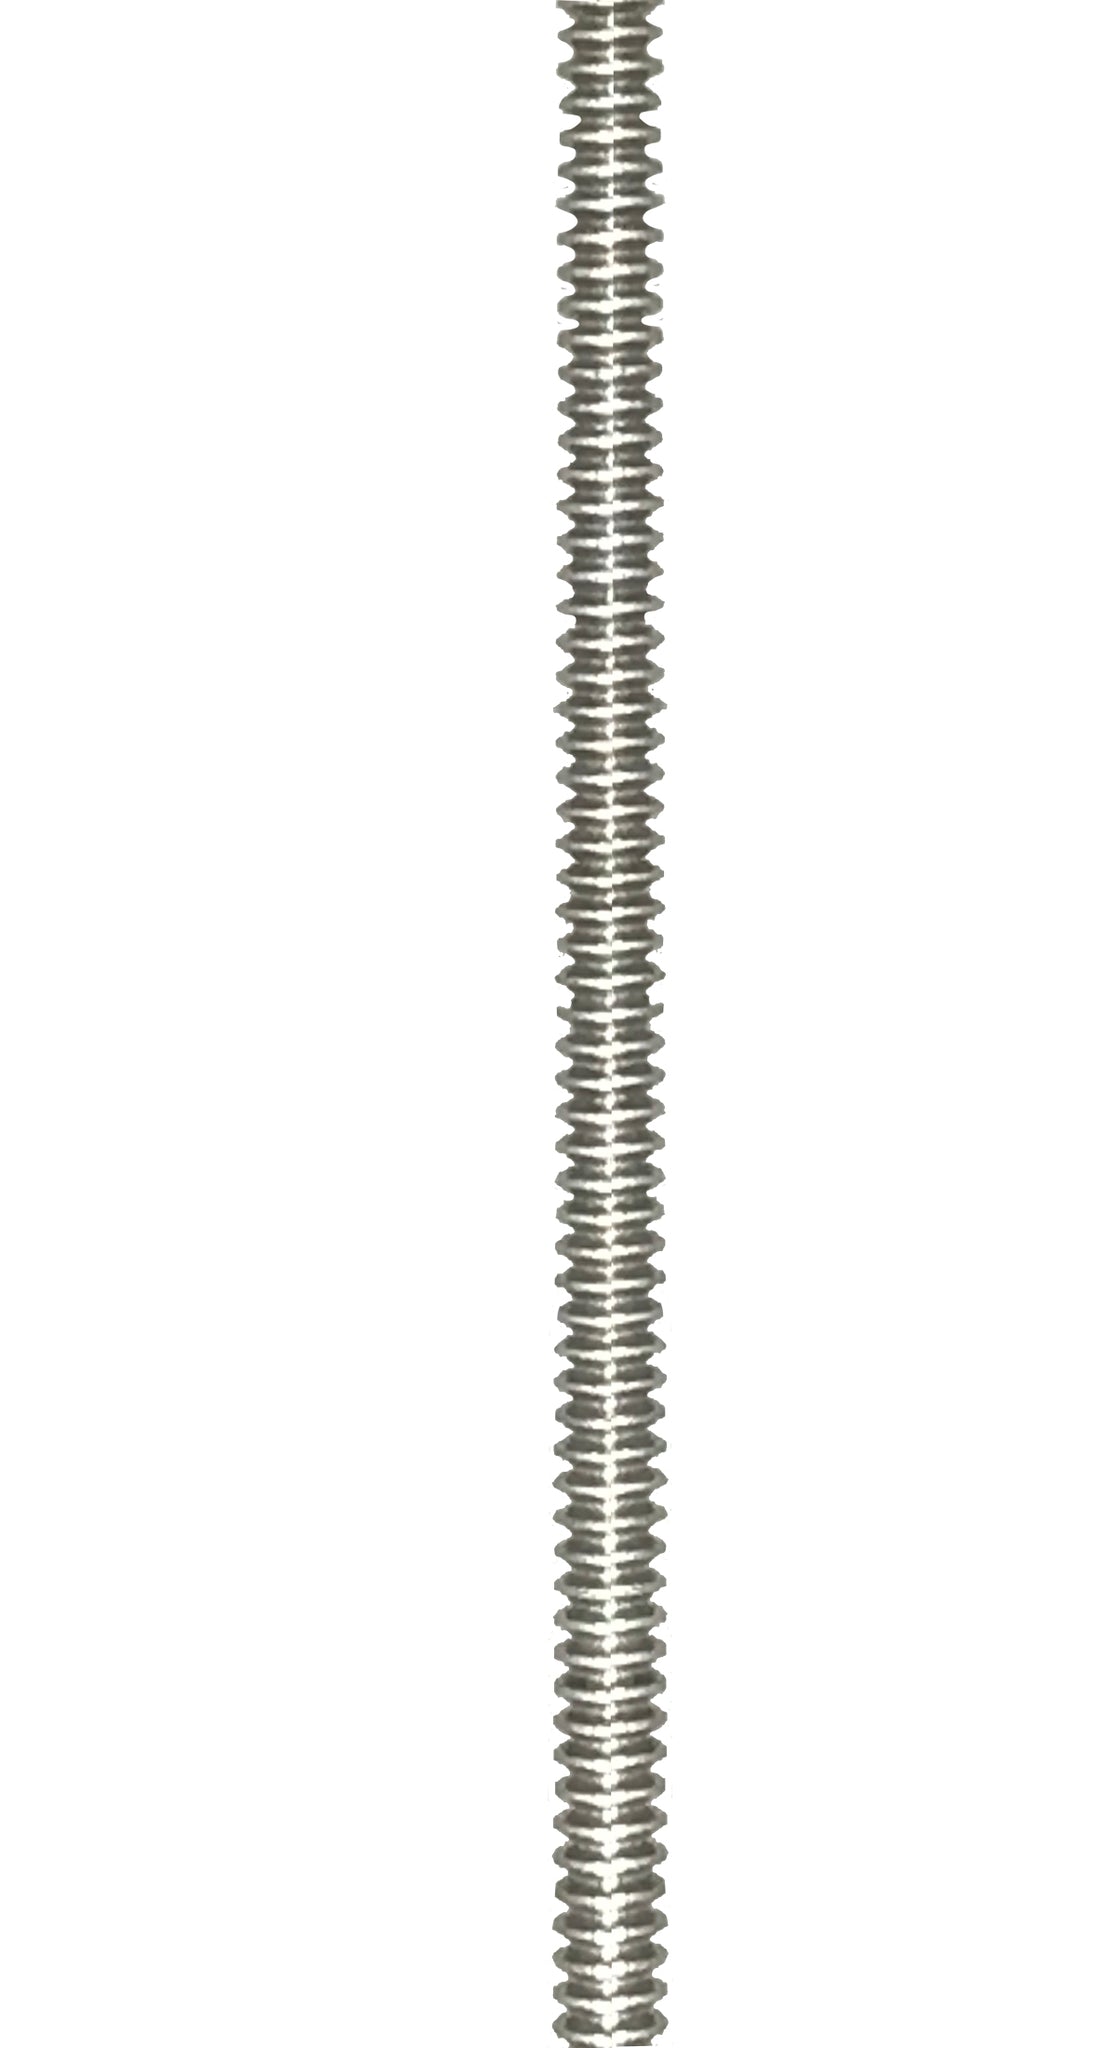 4-40 Stainless Steel Fully Threaded Rods (12 / 305mm)